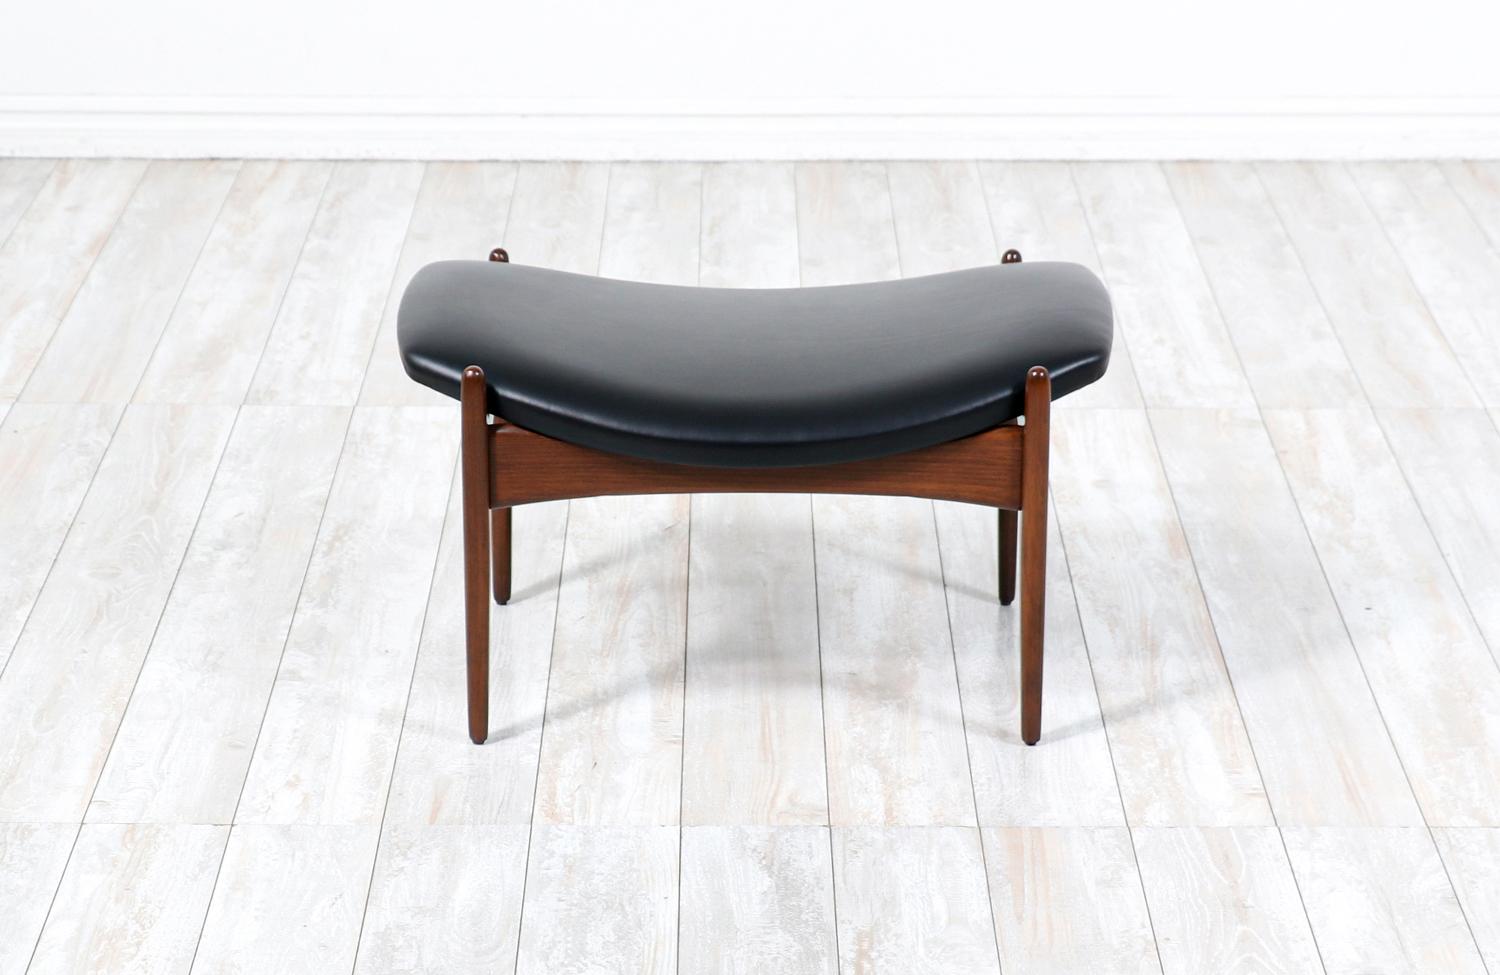 Stylish sculptural stool designed by Ib Kofod-Larsen, in collaboration with the Danish / American company Selig, int the 1960s. This beautifully designed modern stool features a sculpted wood frame that supports its comfortable new high-density foam